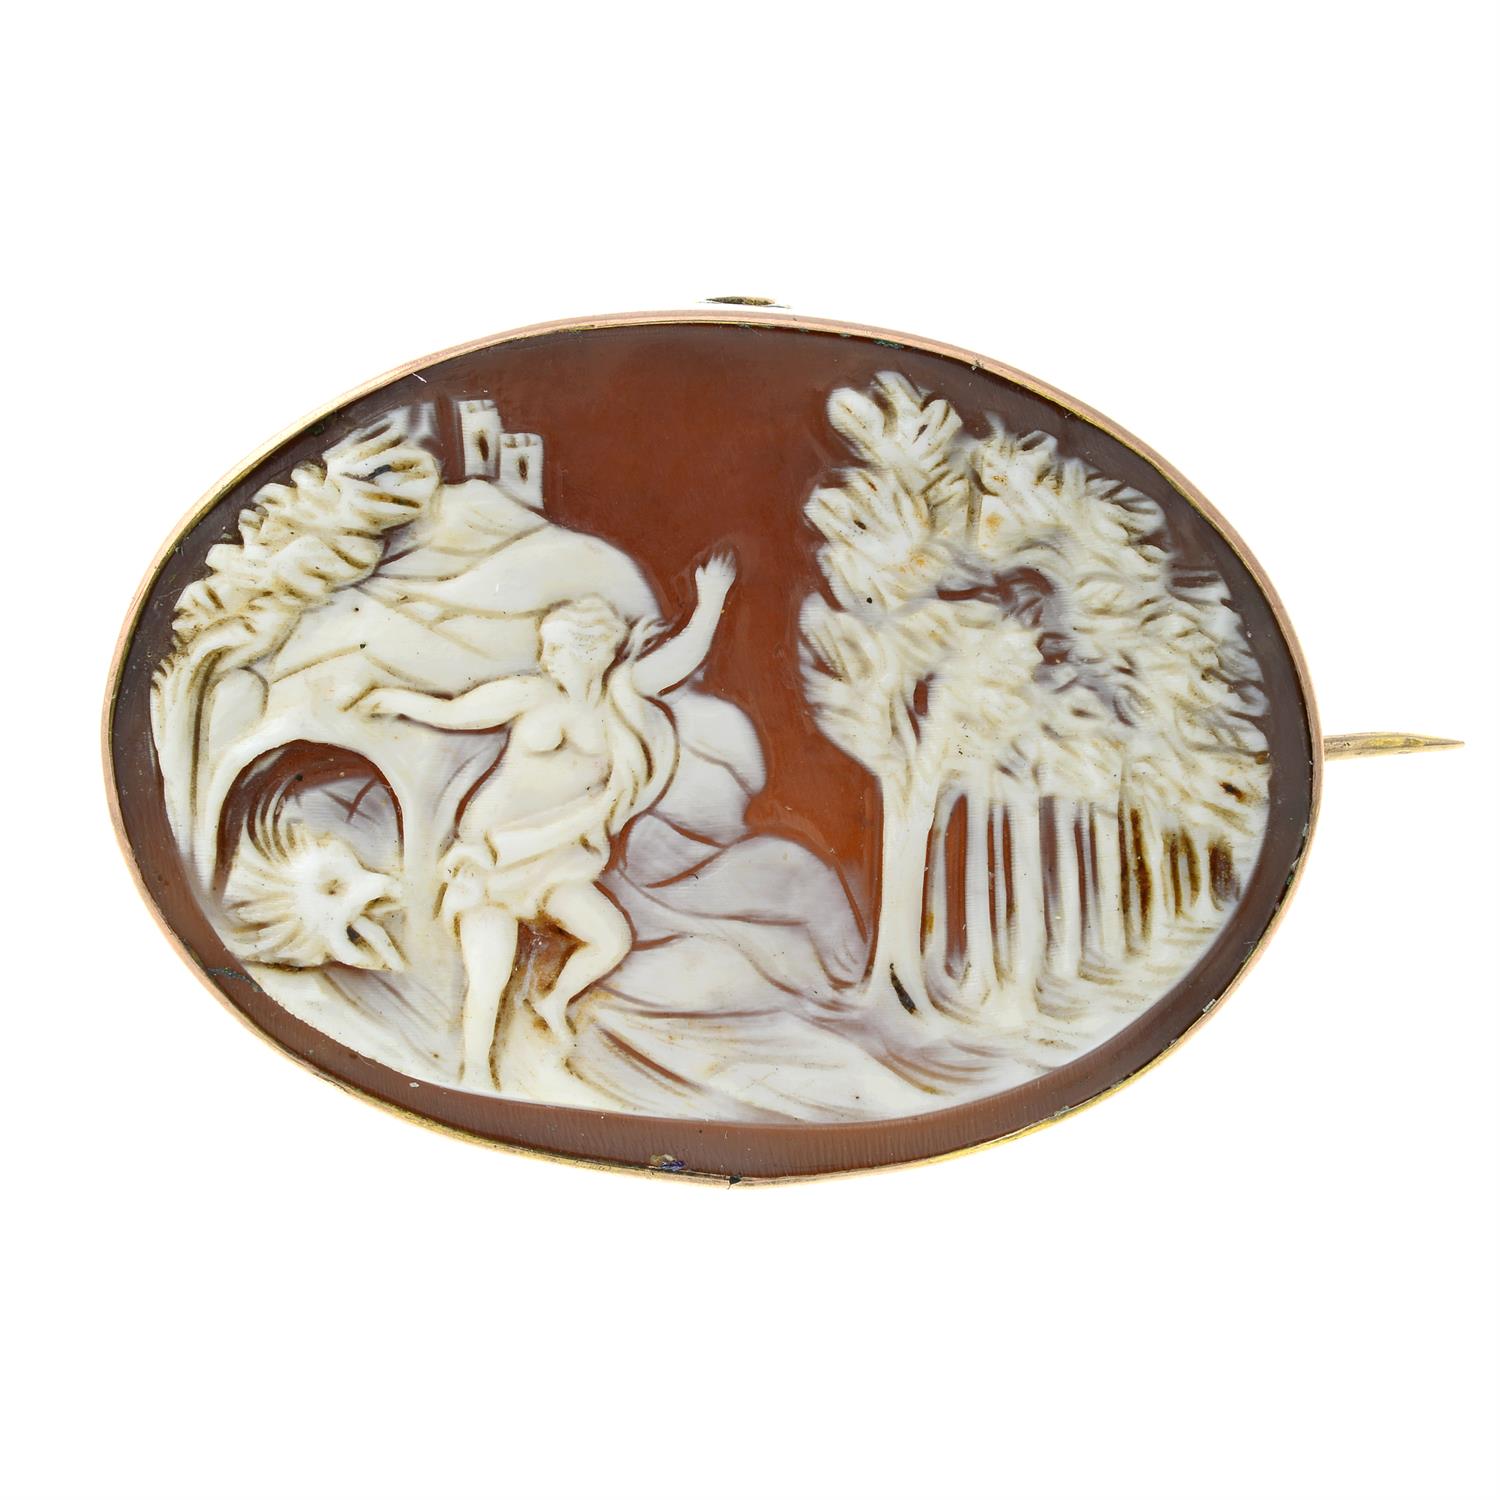 A late 19th century 9ct gold cameo brooch, possibly depicting Andromeda - Image 3 of 4